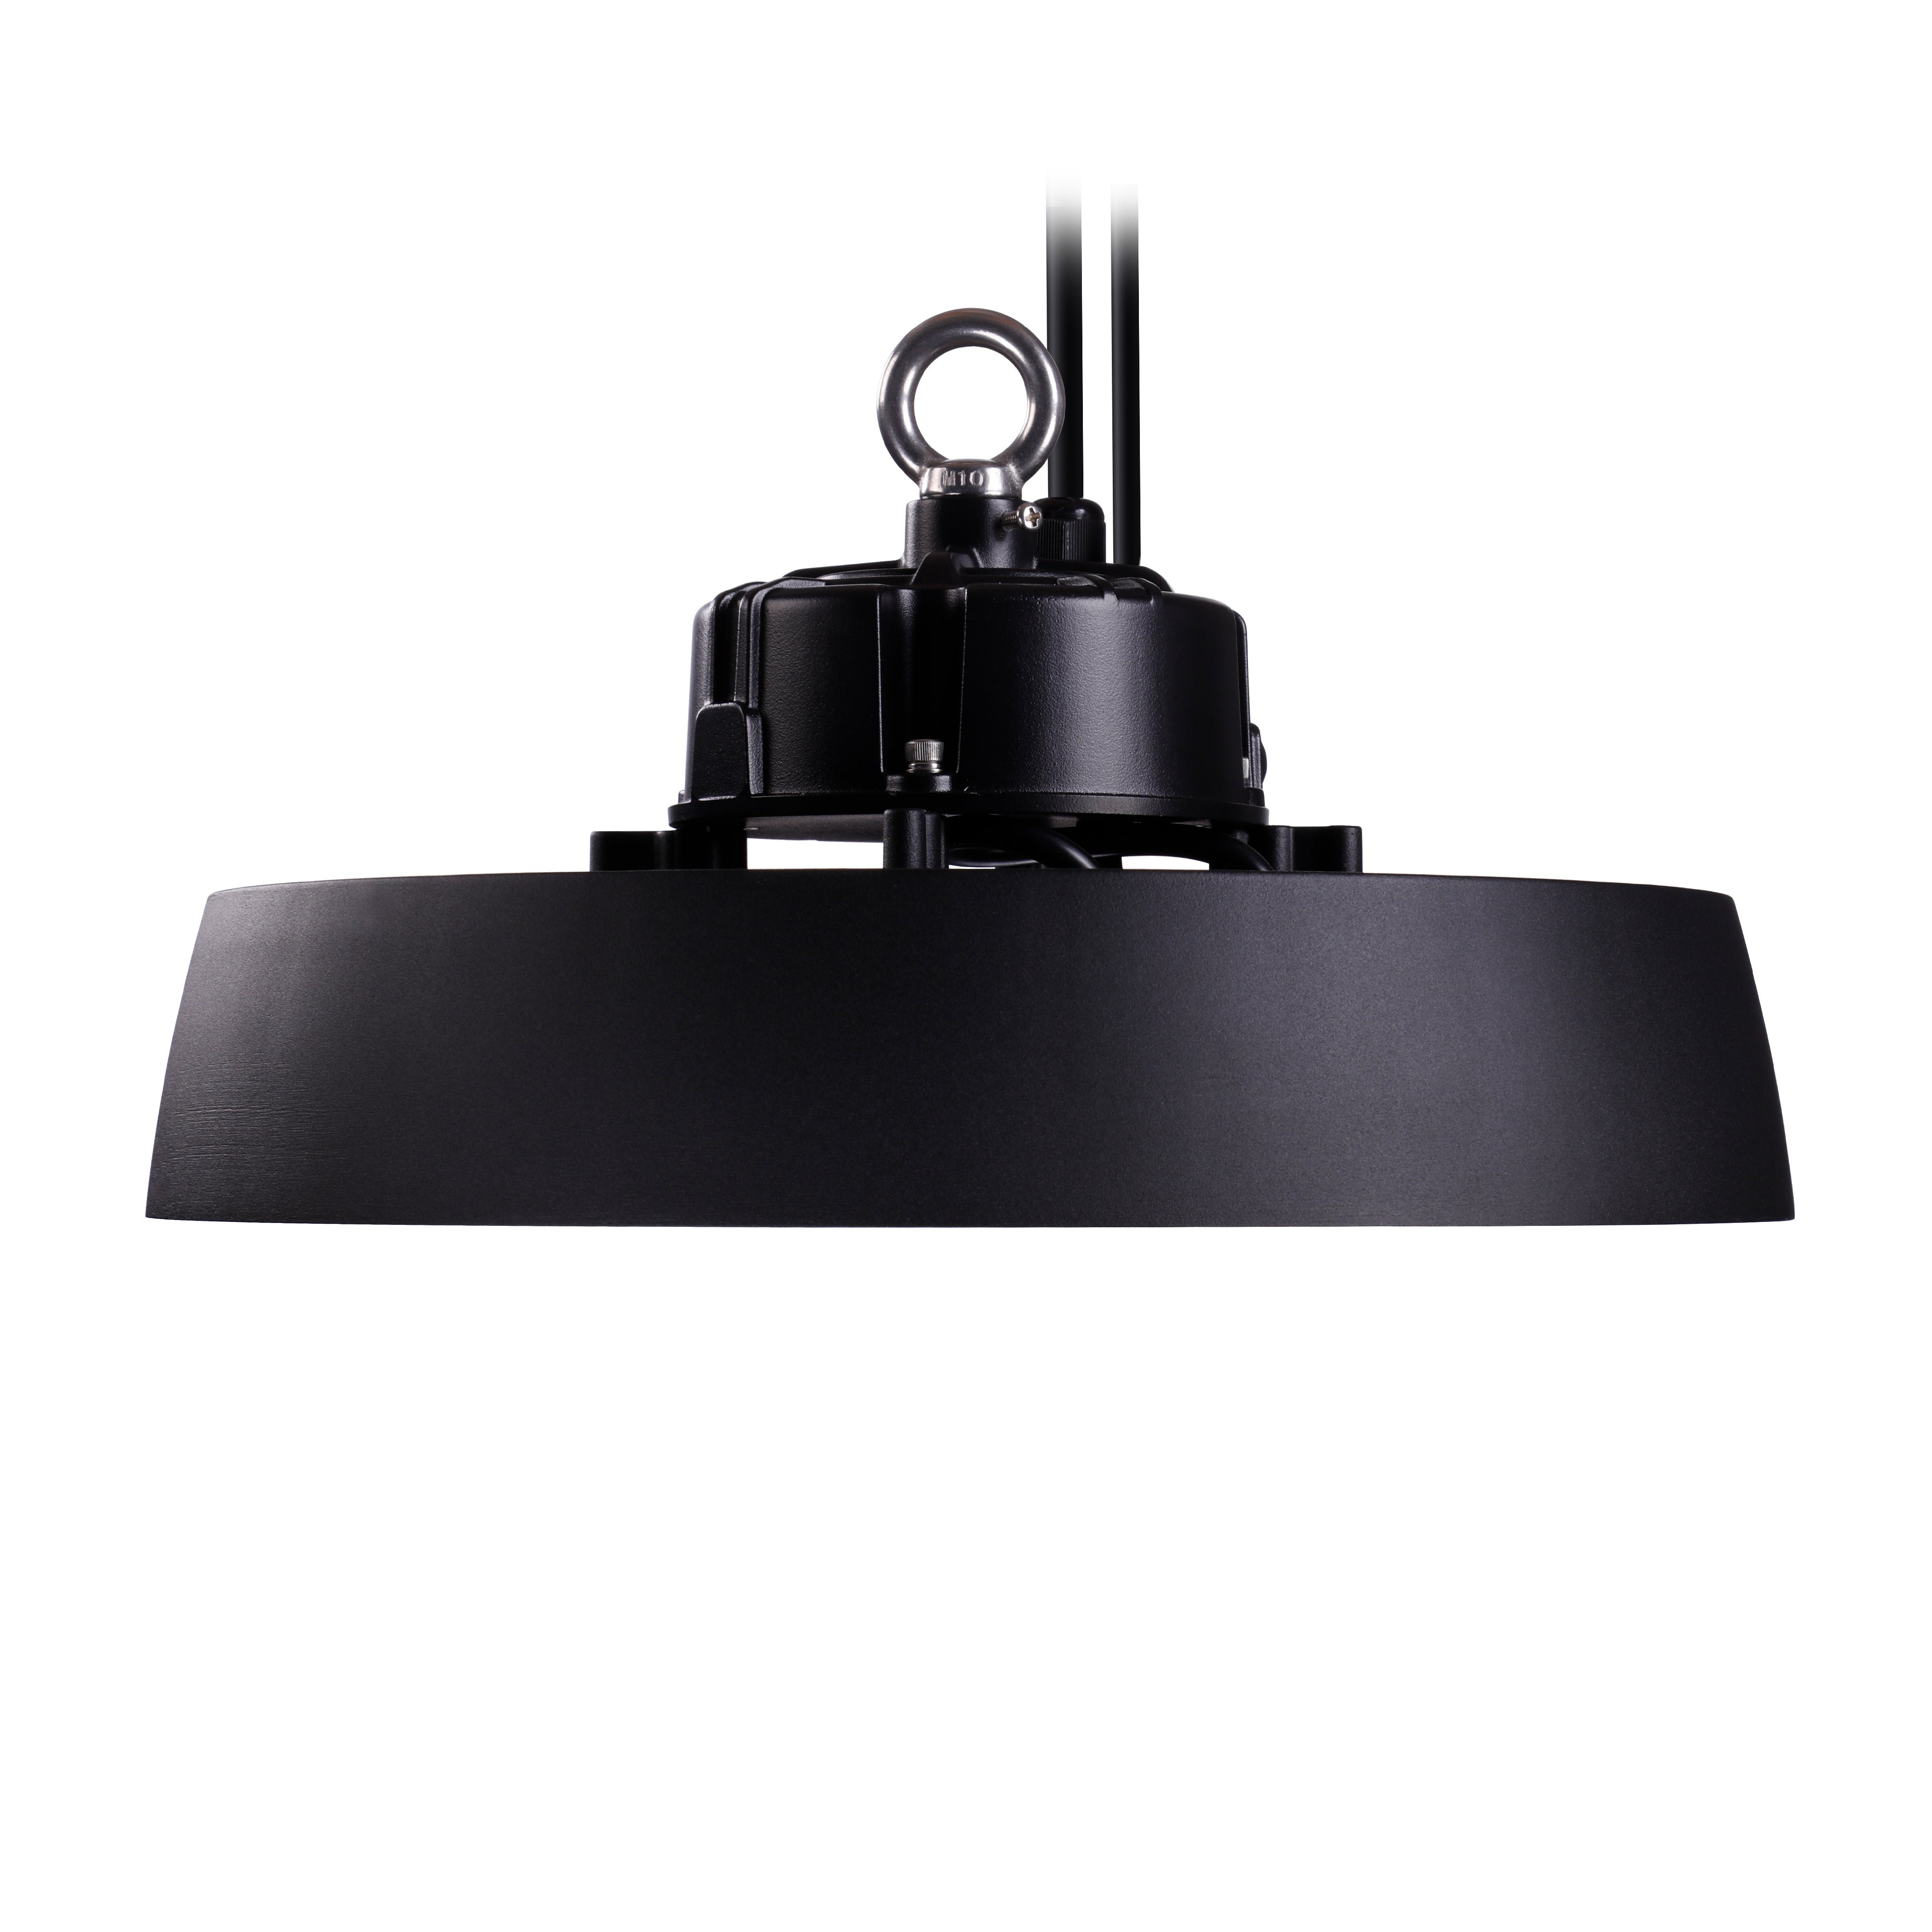 SkyForge Plus 200W LED High Bay Light Fixture with Shade